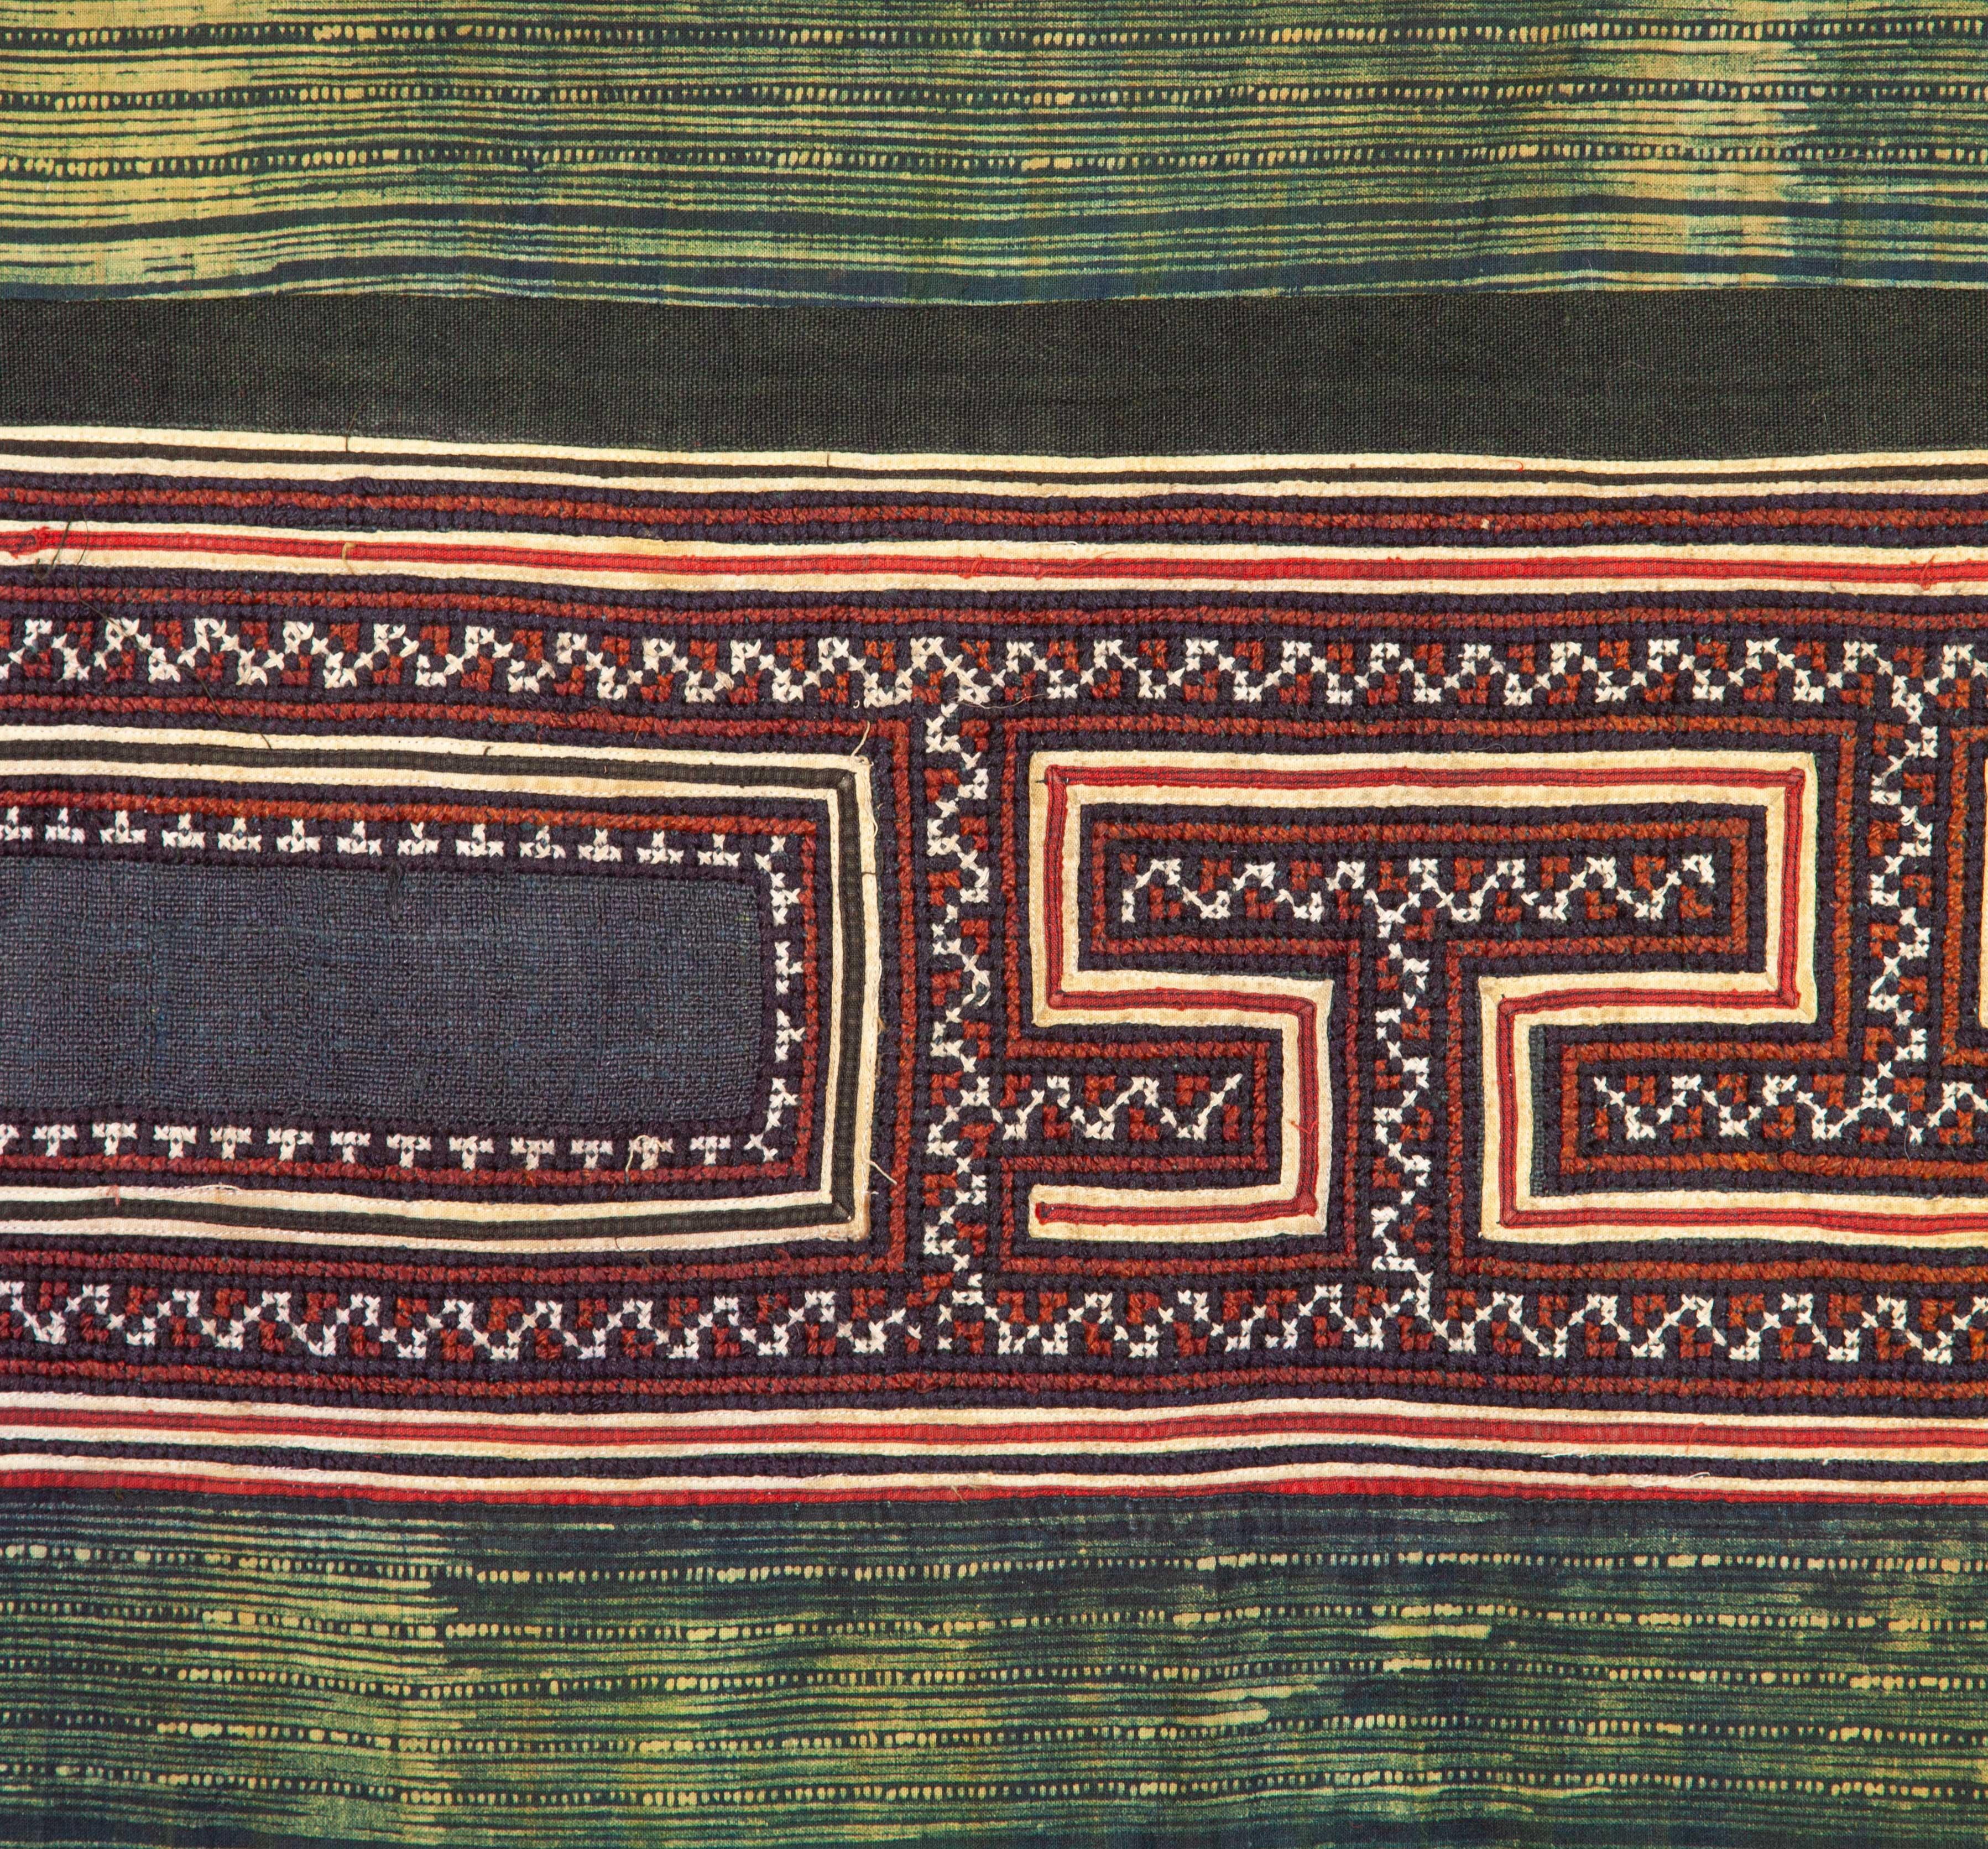 Tribal Hmong Batik and Embroidered Blanket with Indigo Based Green Color For Sale